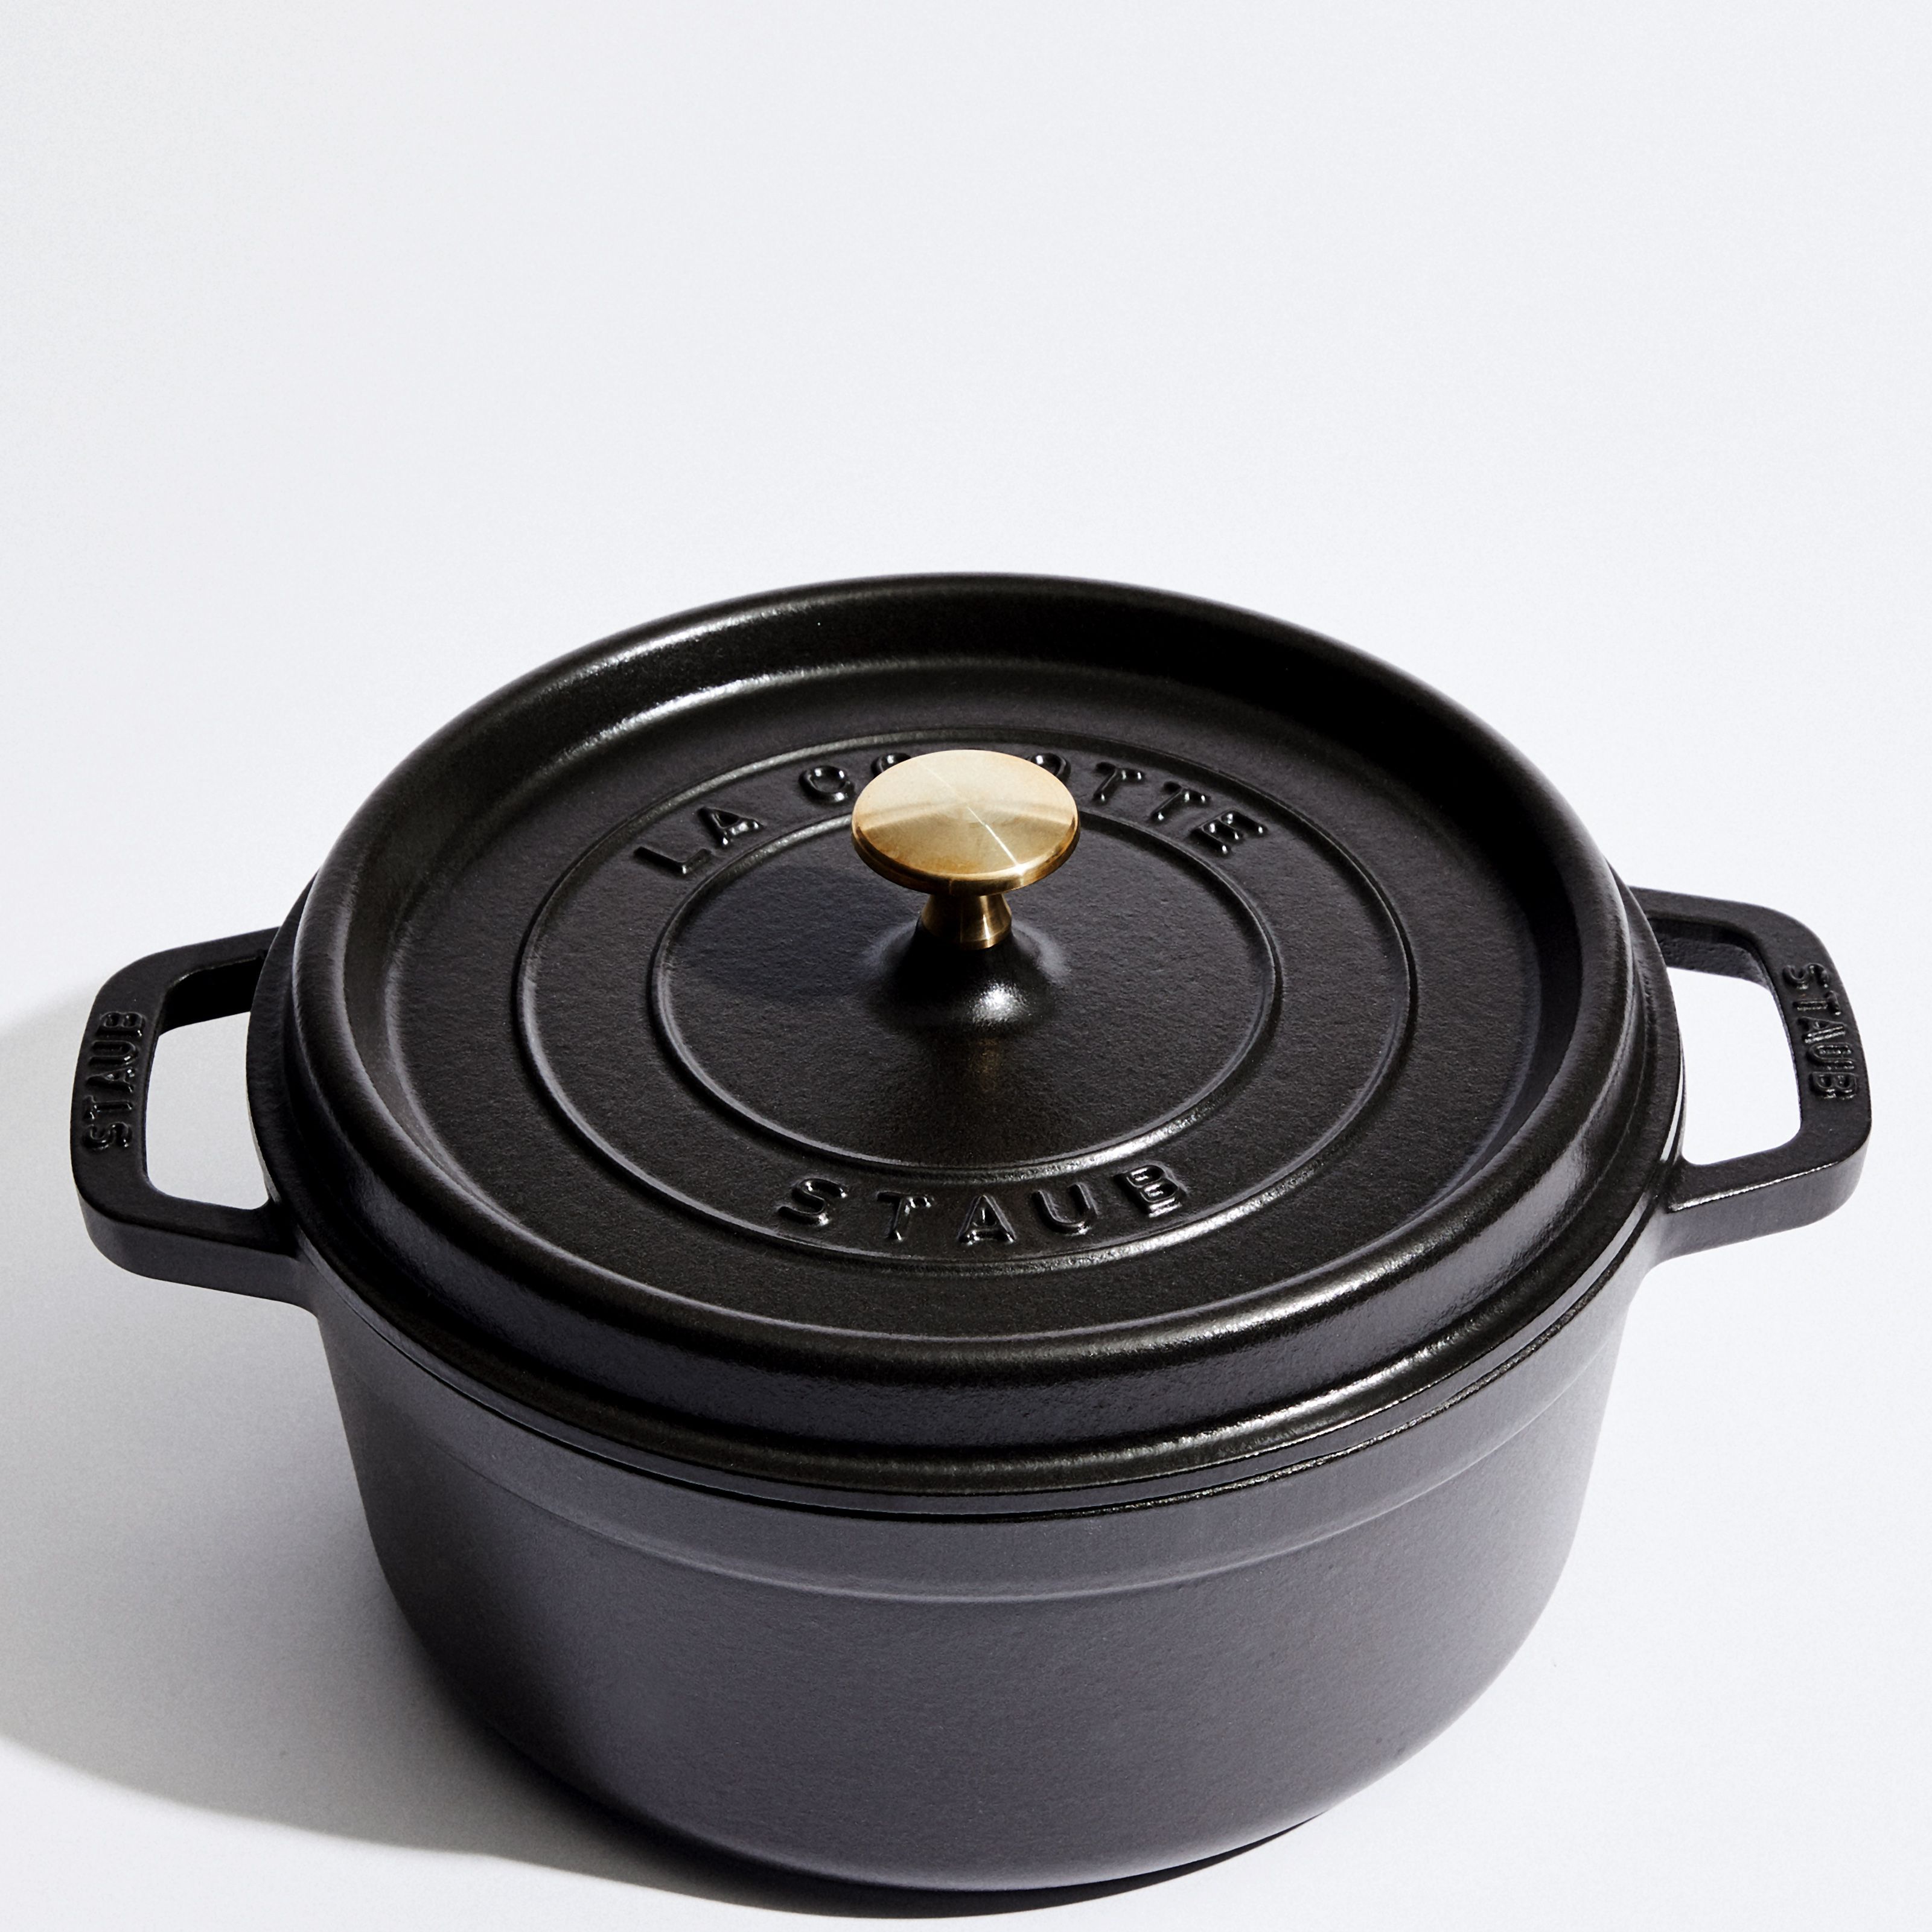 Help! Bought a new staub dutch oven, used for the first time. Is